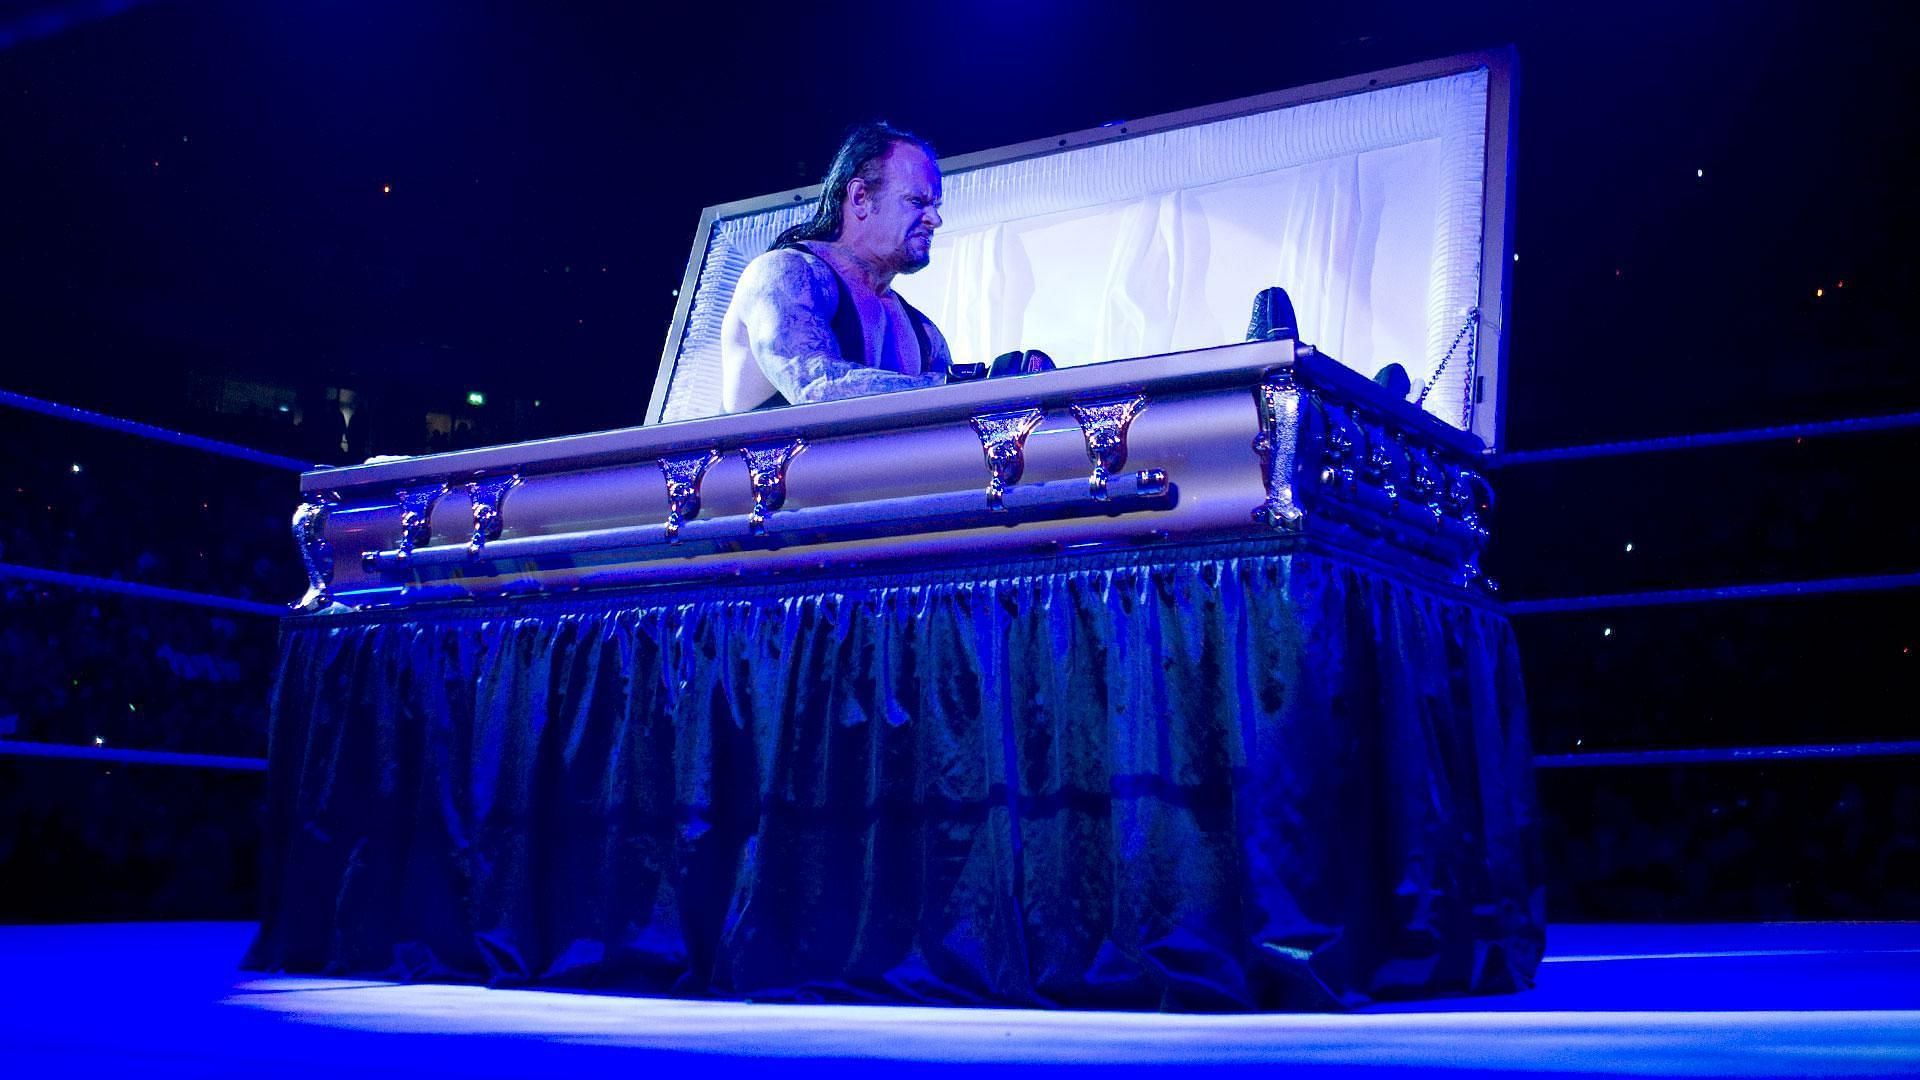 The Undertaker used to compete in casket matches